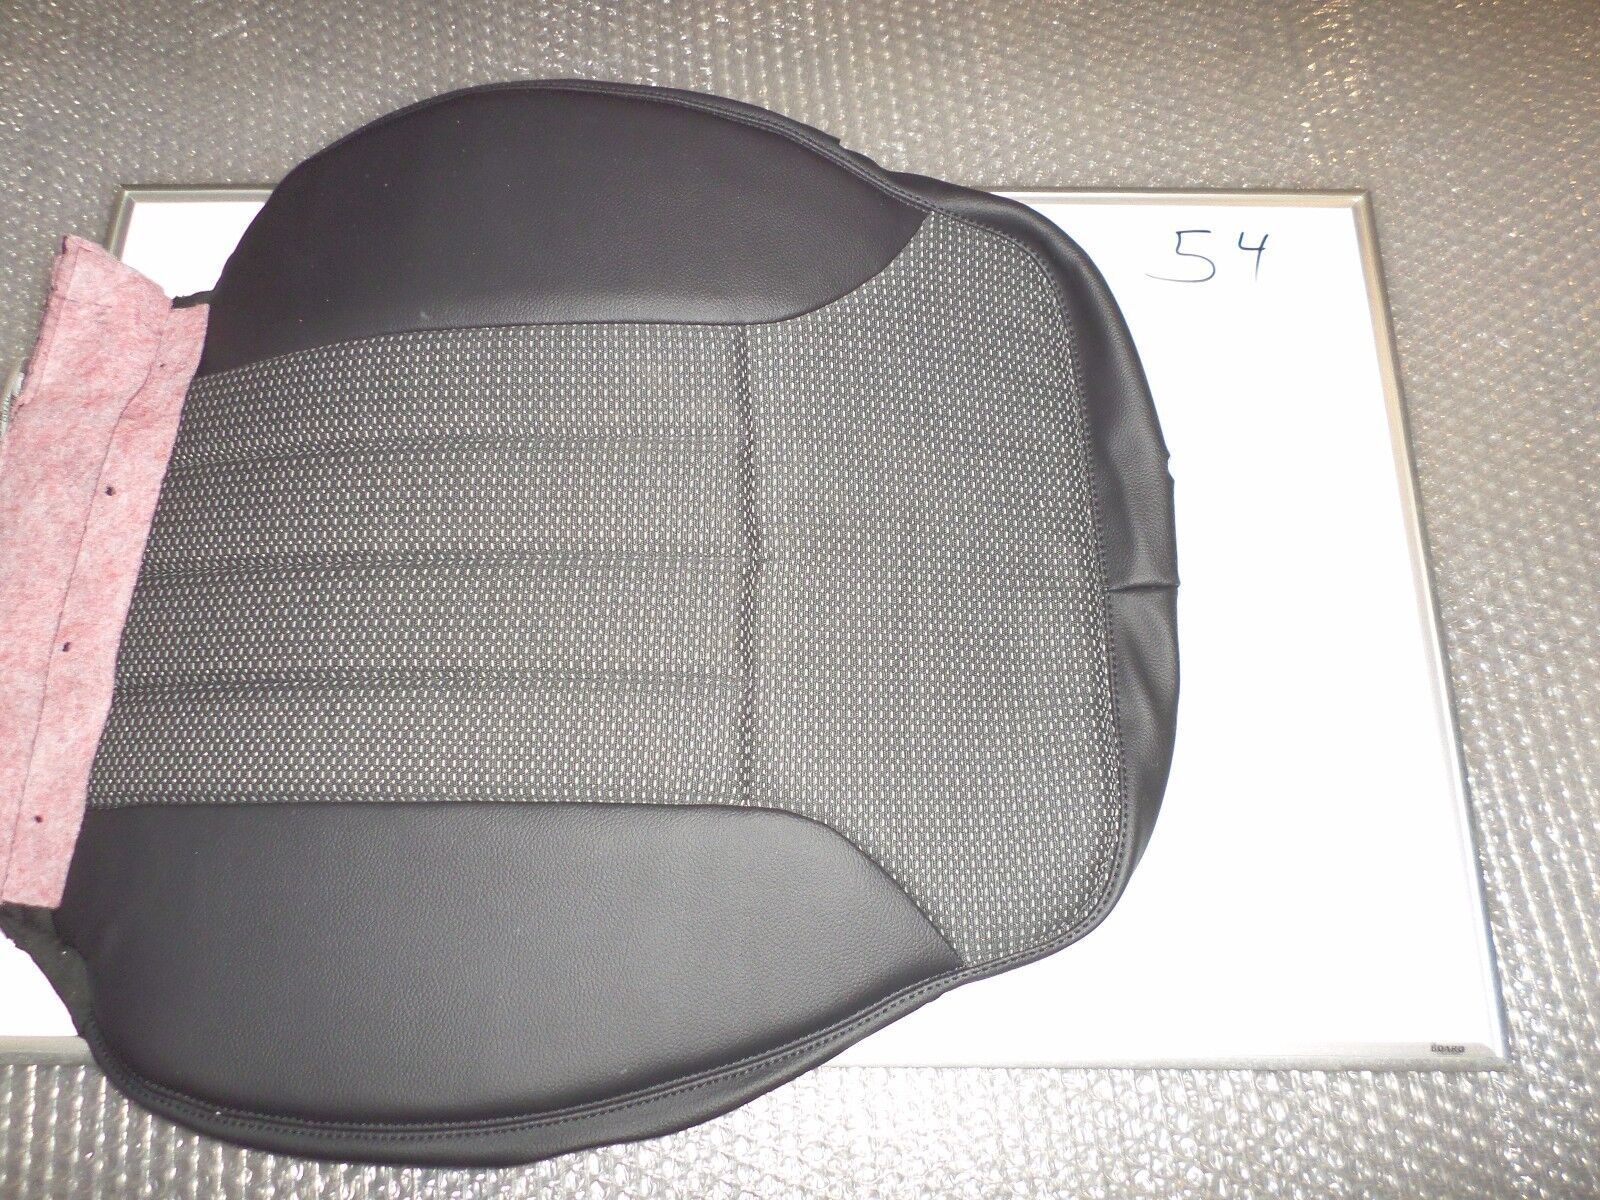 New OEM Leather Seat Cover Mercedes ML-Class R-Class 2006-2013 Front Black RH - $183.15